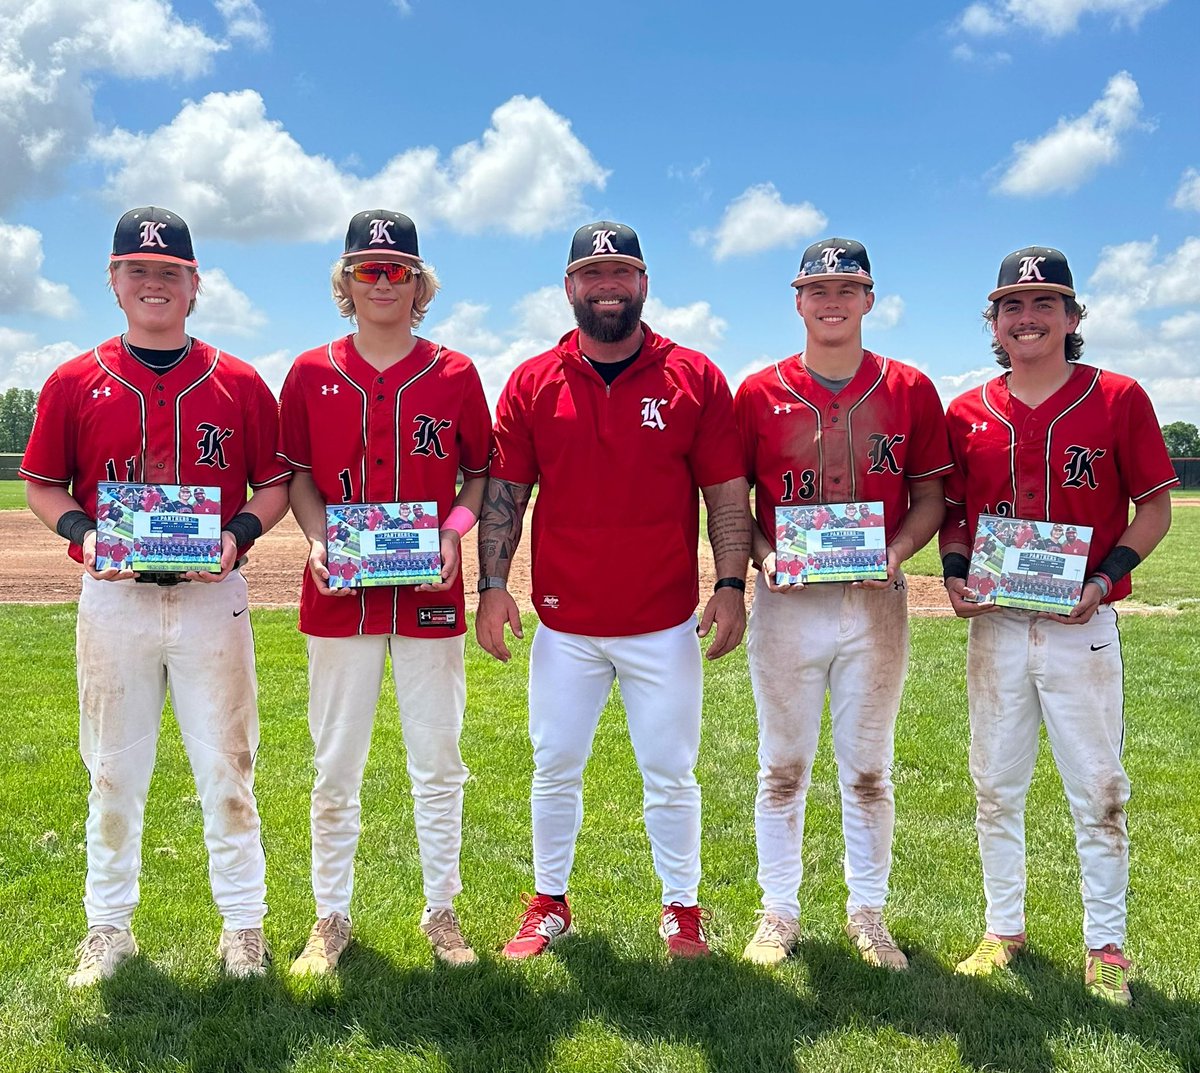 To our seniors, it’s been an honor to coach you this season. Big 7-6 come from behind win in 7th against #3 ranked 1A Union City for senior day. You 4 young men have led this season and helped lay foundation moving forward for our baseball program. I wish you all much success!